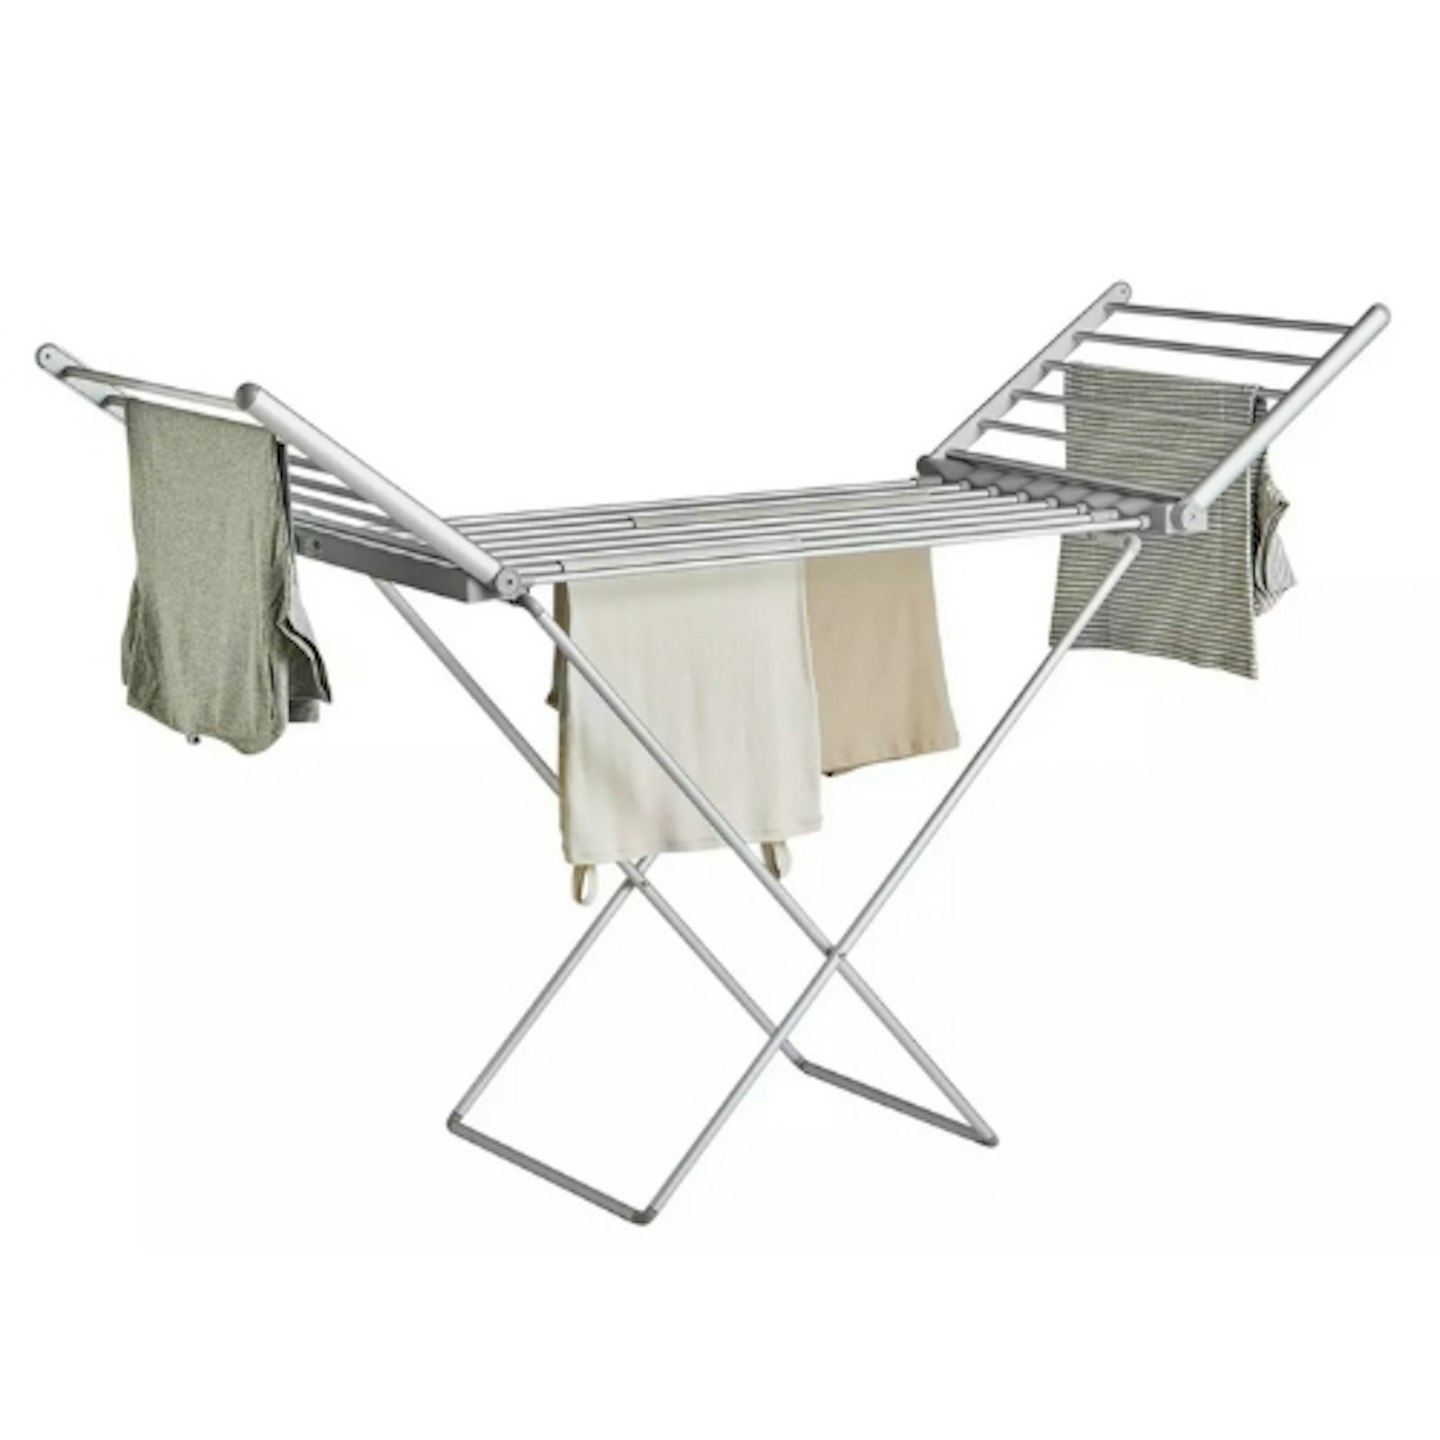 Argos Home 11.5m Heated Electric Indoor Clothes Airer